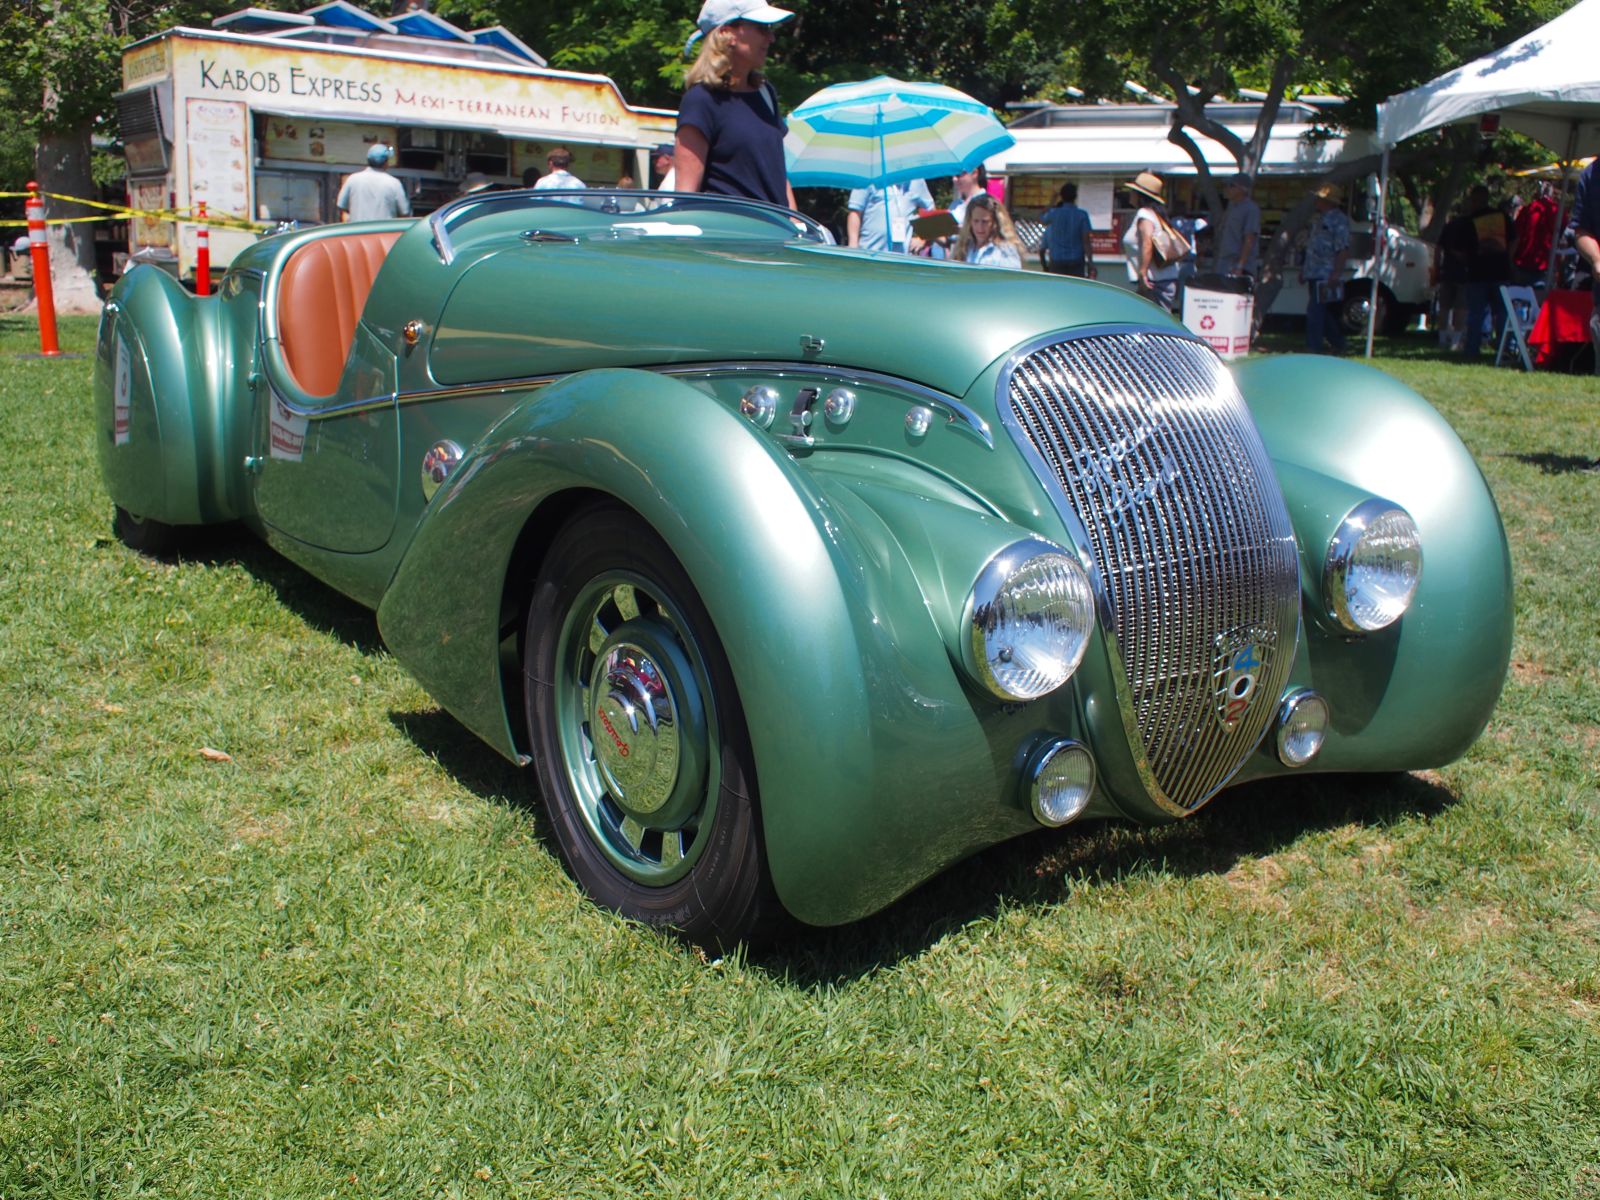 This 1938 Peugeot Darl’mat Sport Roadster is one of the prettiest cars I’ve ever seen.